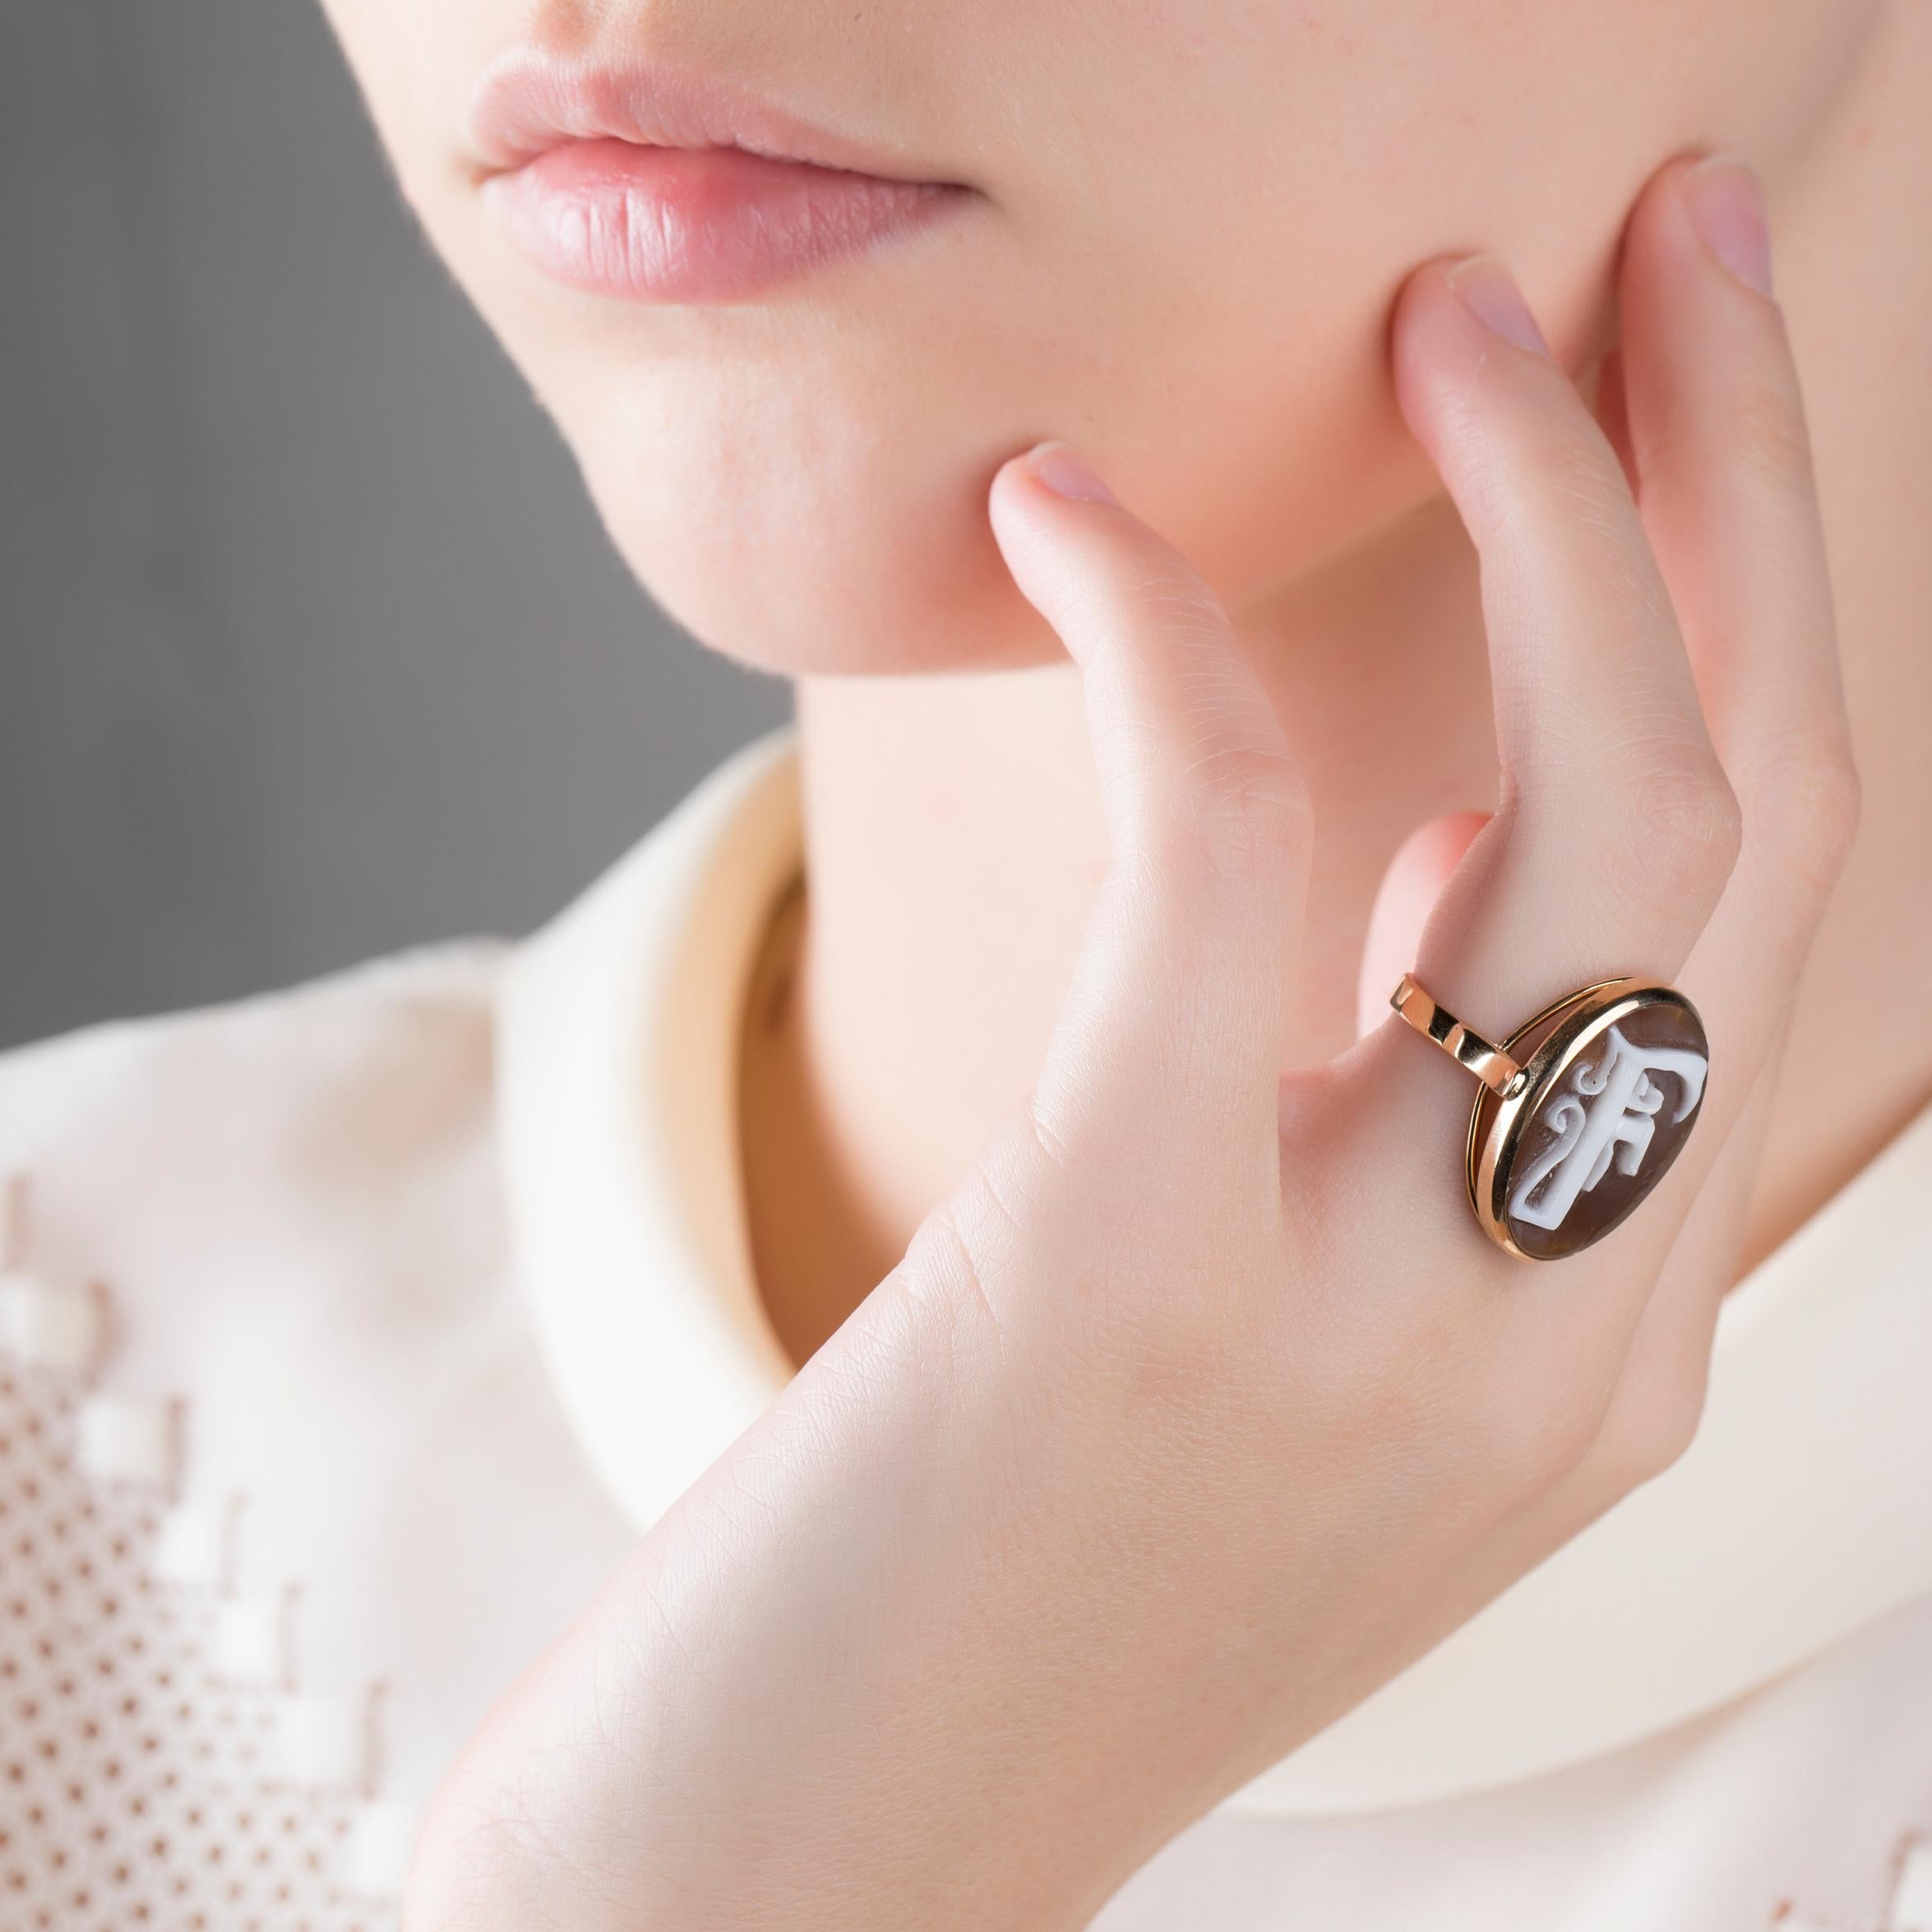 Unique and unisex, the cameo ring from IOSSELLIANI is designed to blend Victorian Age style and contemporary aesthetics into a harmonious balance between elegance and extra impact. The custom made ring is crafted with a 15,5x20mm magnificent oval